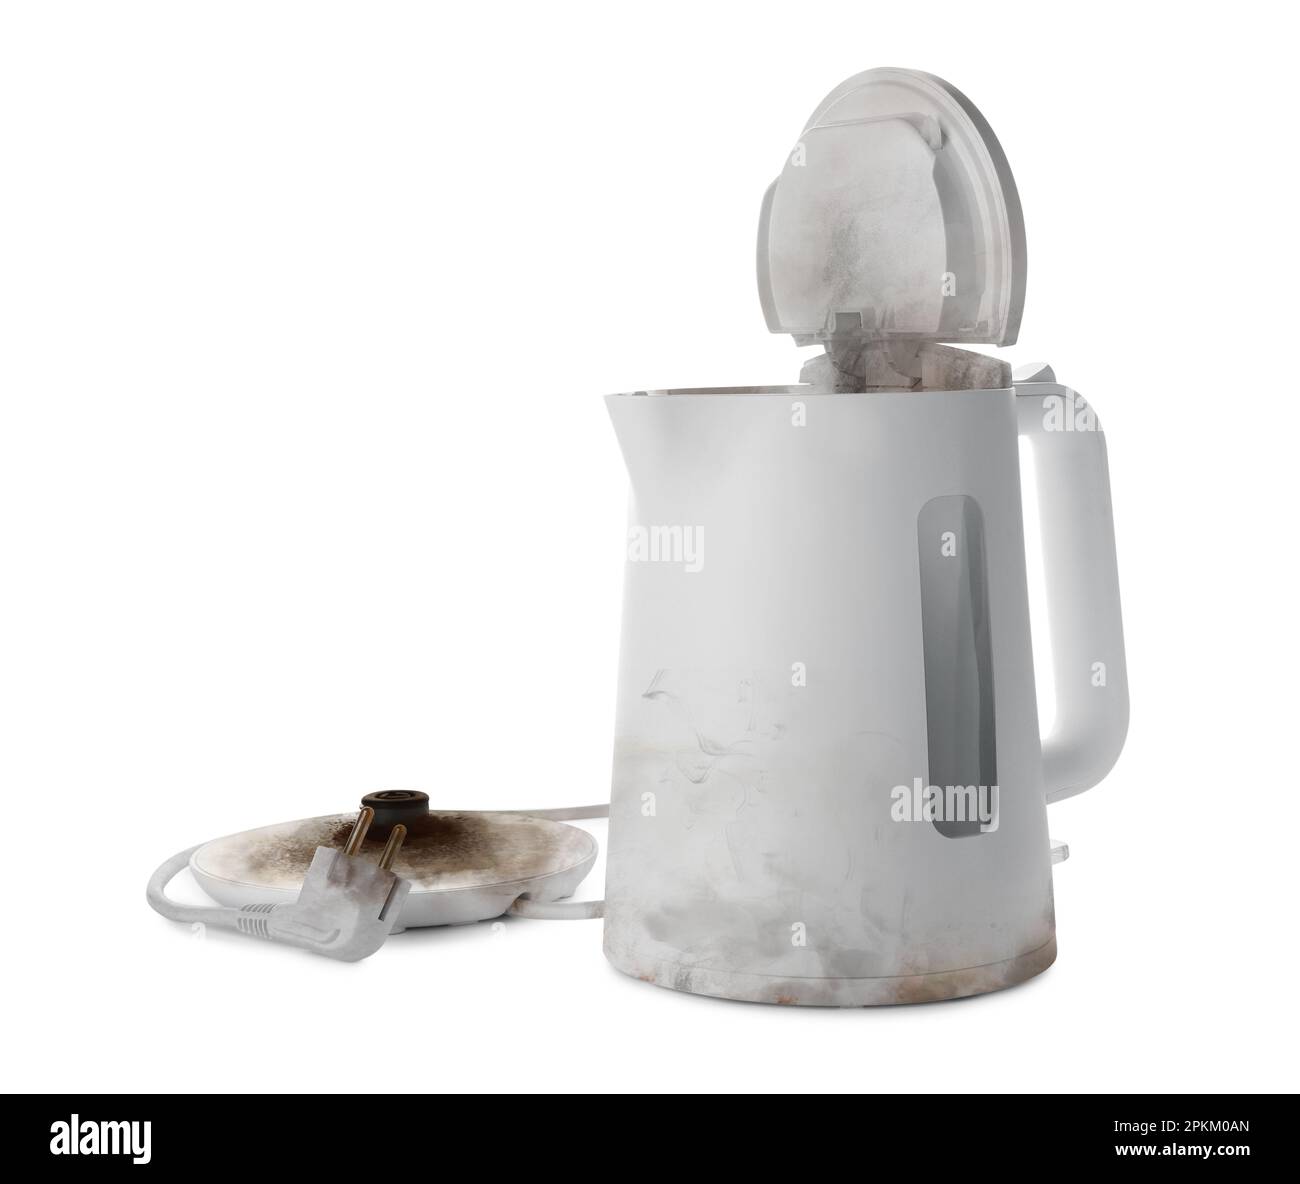 https://c8.alamy.com/comp/2PKM0AN/burnt-electric-kettle-with-base-and-plug-on-white-background-2PKM0AN.jpg